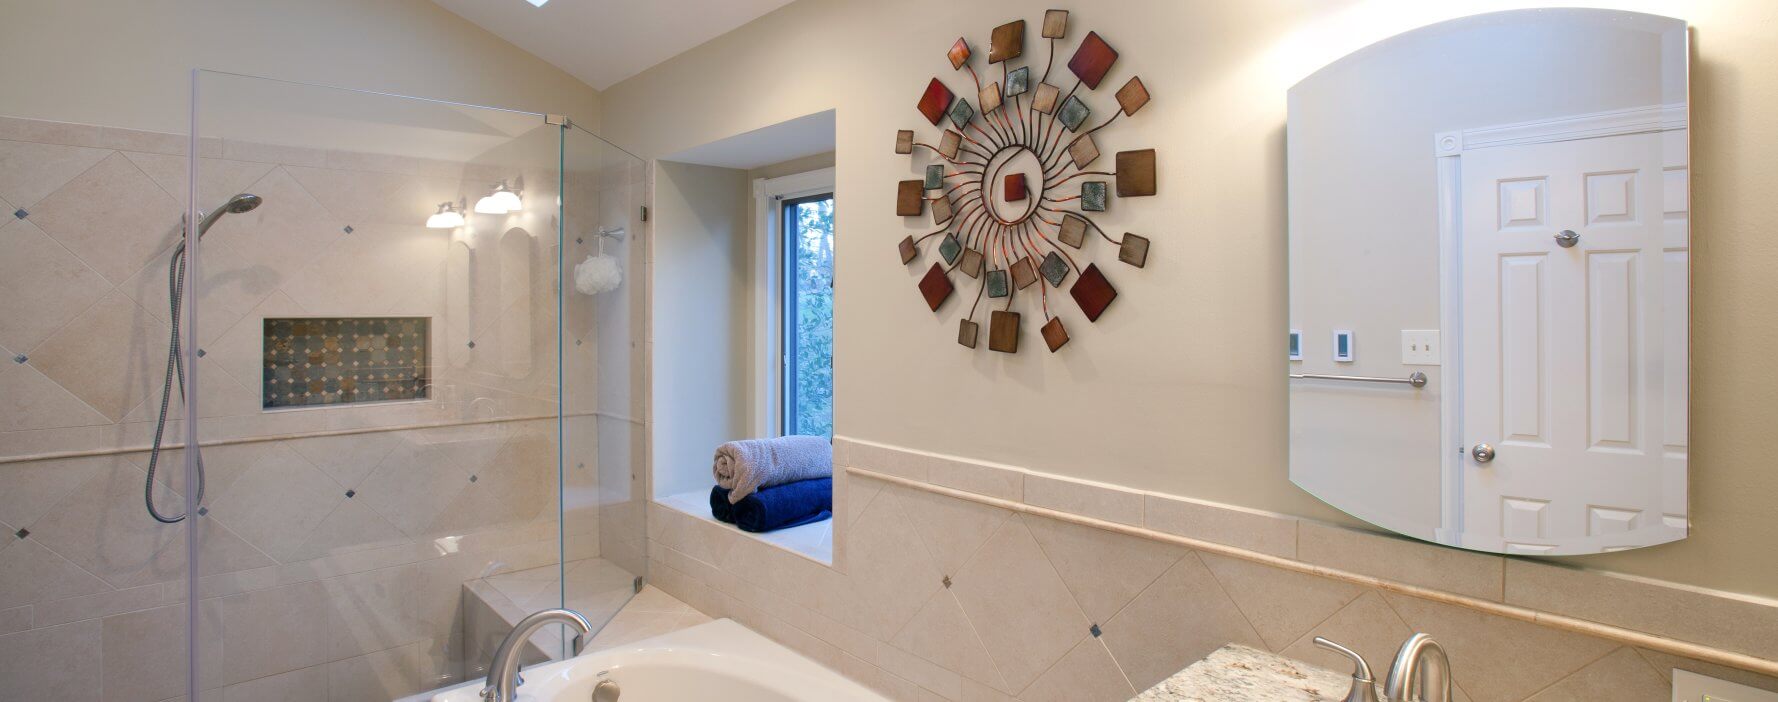 a bathroom with a large clock mounted to the wall